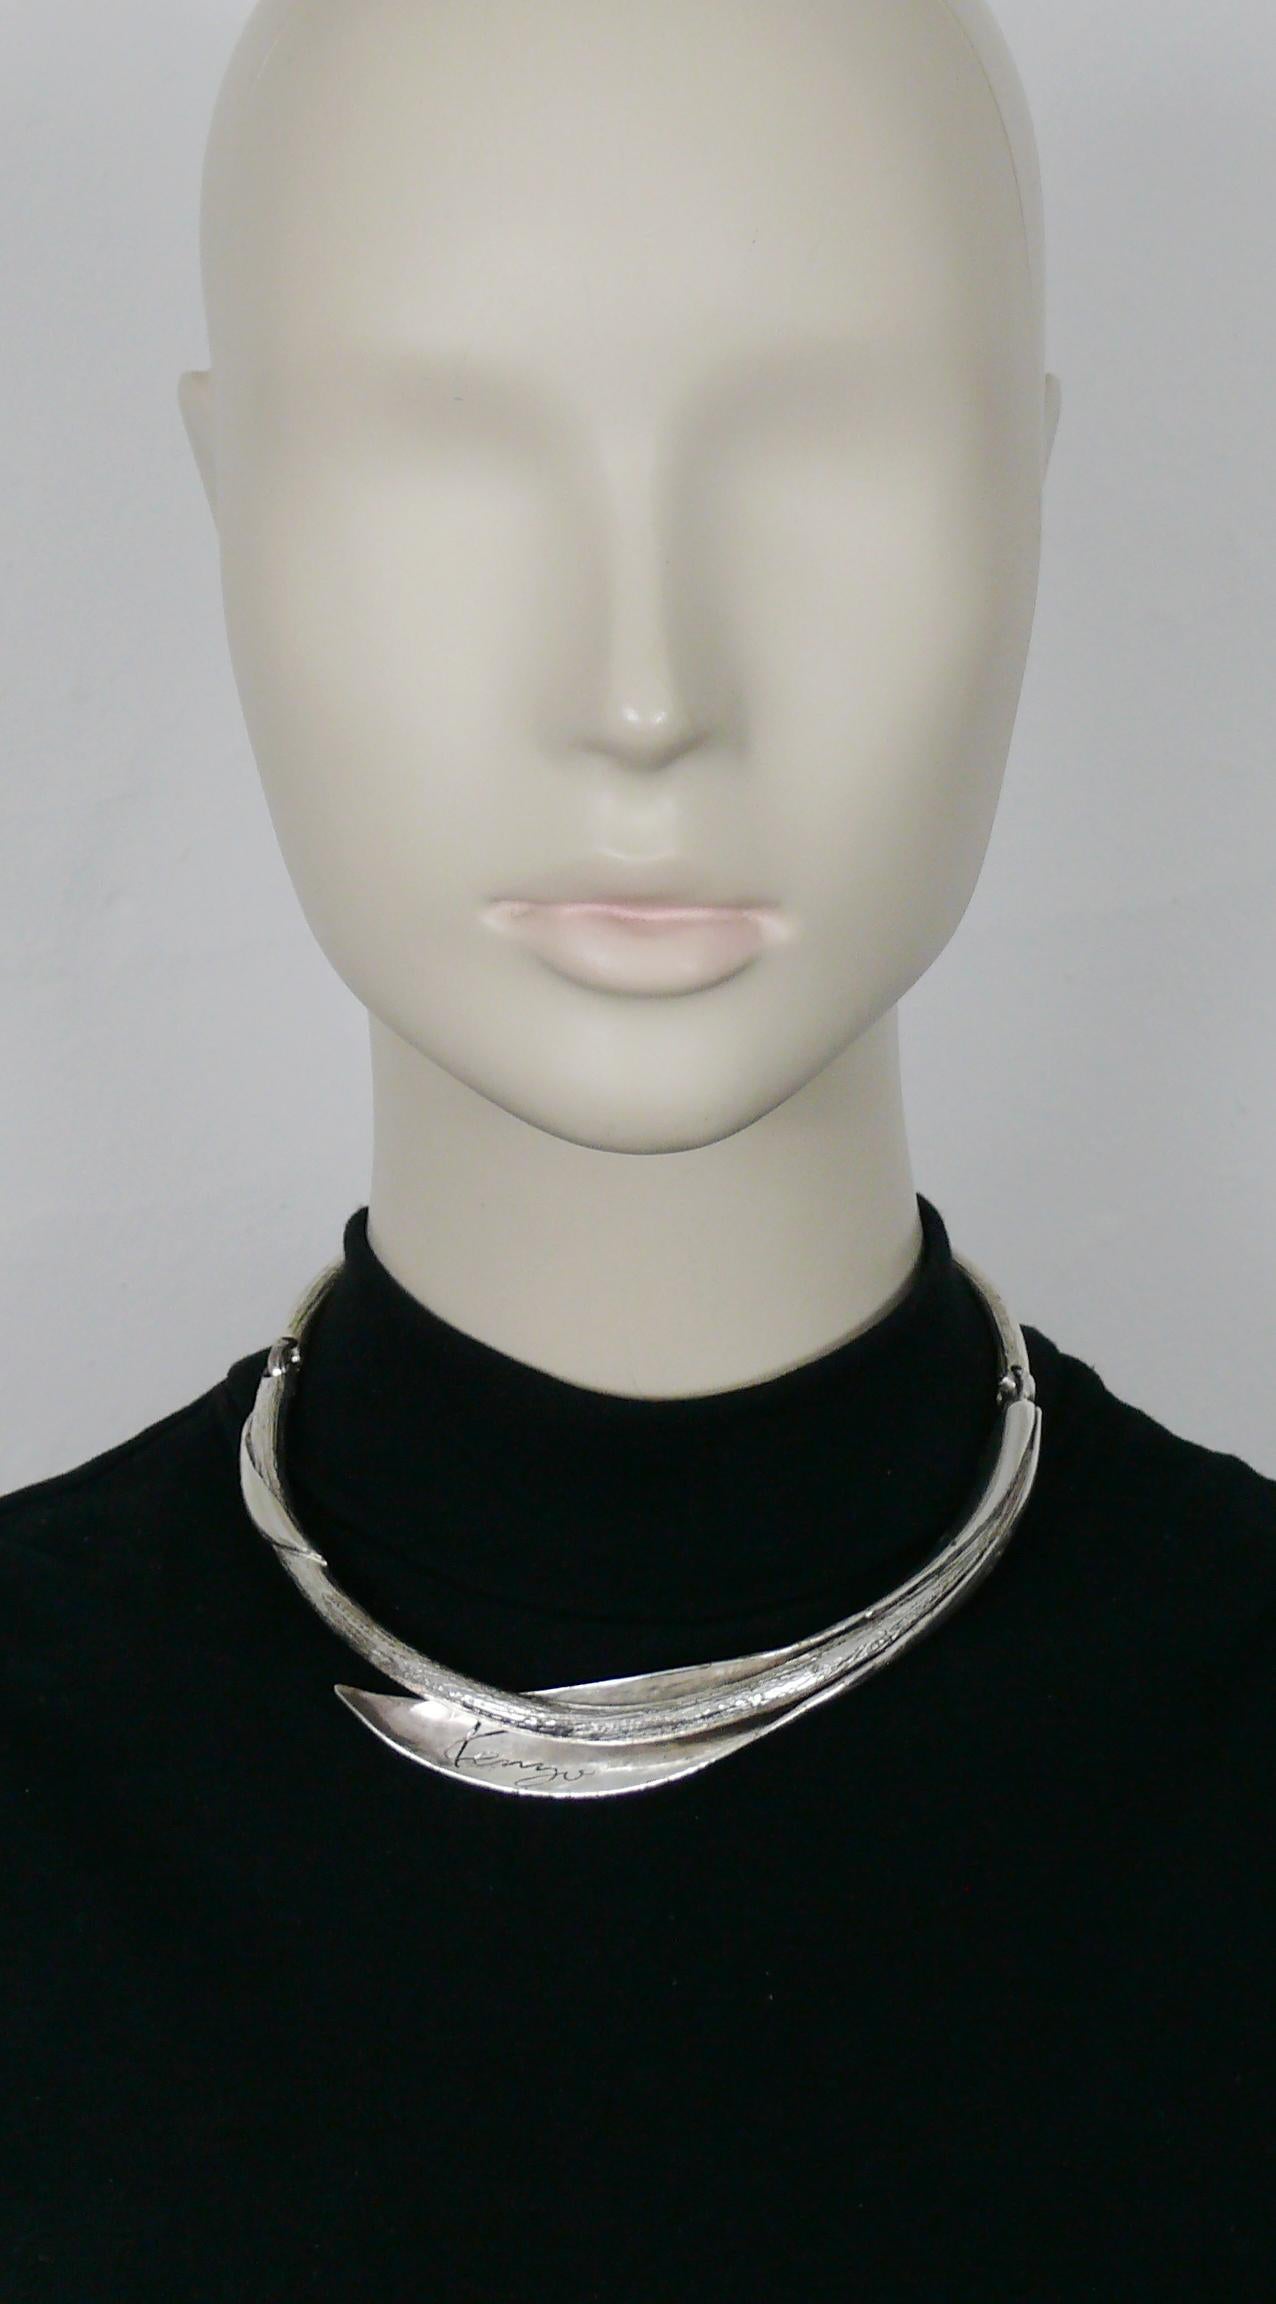 KENZO vintage calla lily flower rigid choker necklace.

Silver tone metal hardware.

Hook and loop closure.

Embossed KENZO PARIS.

Indicative measurements : inner circumference approx. 38.33 cm (15.09 inches) / max. width approx. 2 cm (0.79